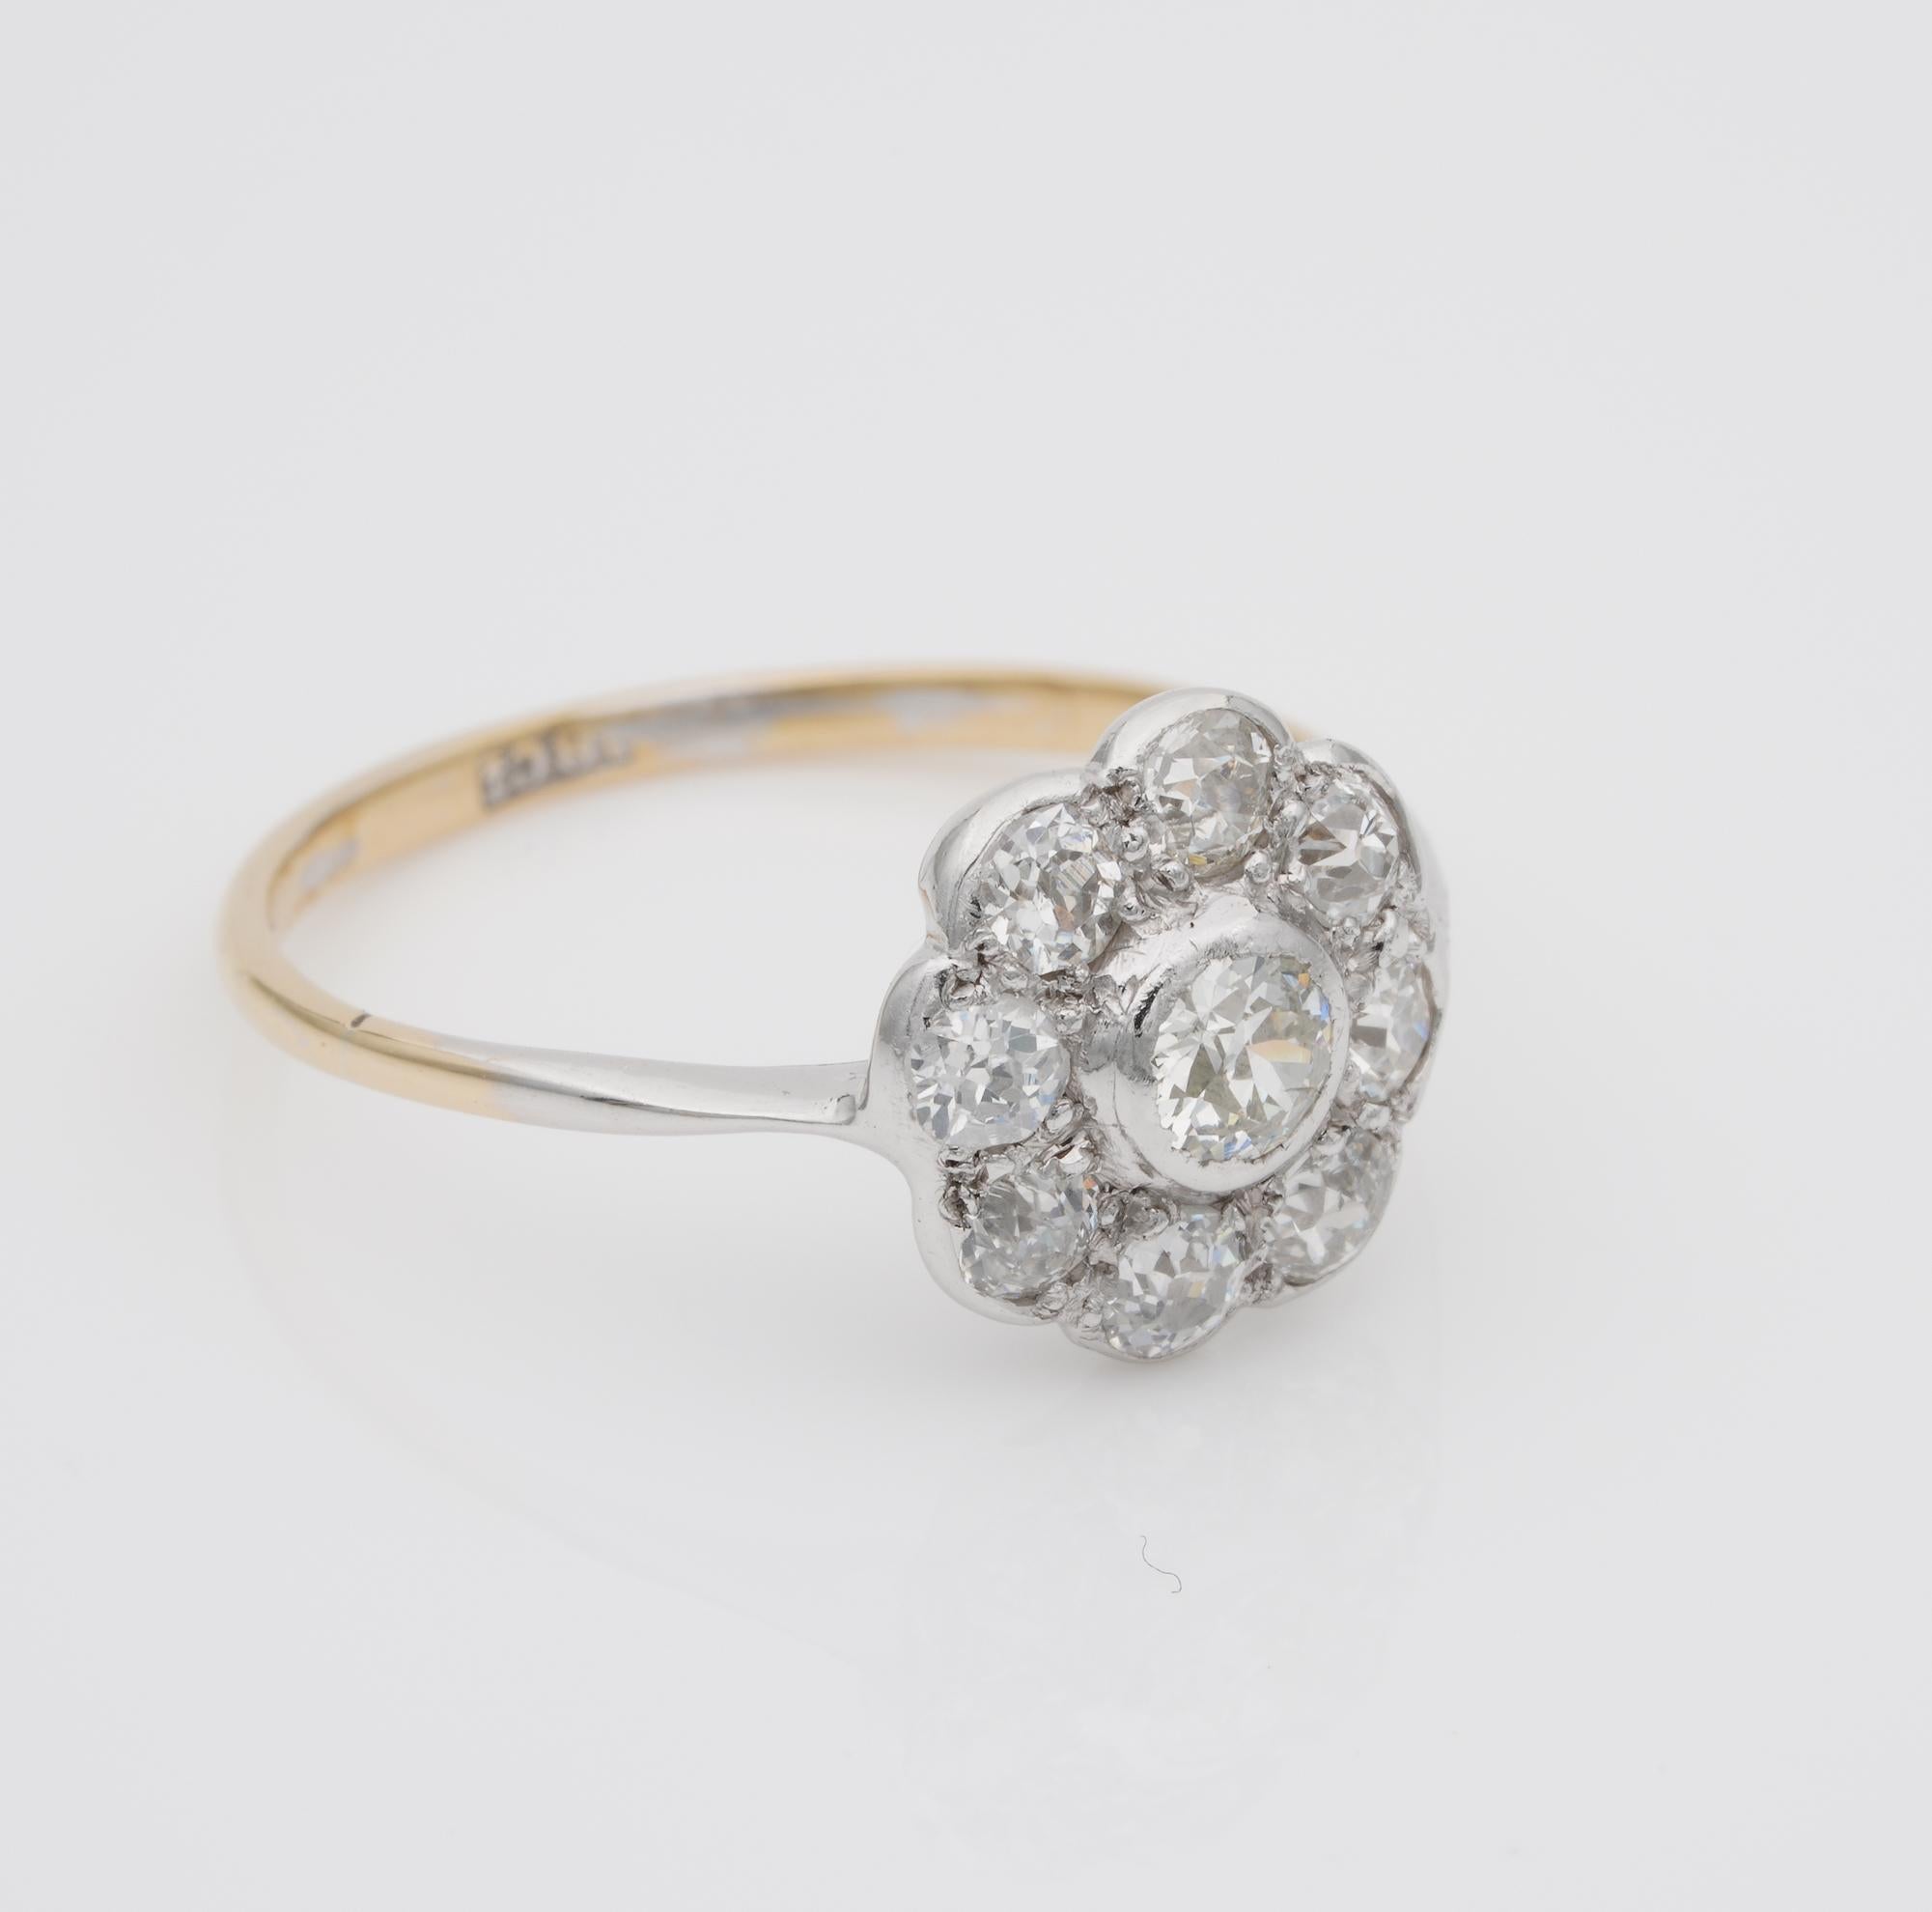 Authentic Edwardian Diamond Cluster Ring 18 Karat Gold Platinum In Good Condition For Sale In Napoli, IT